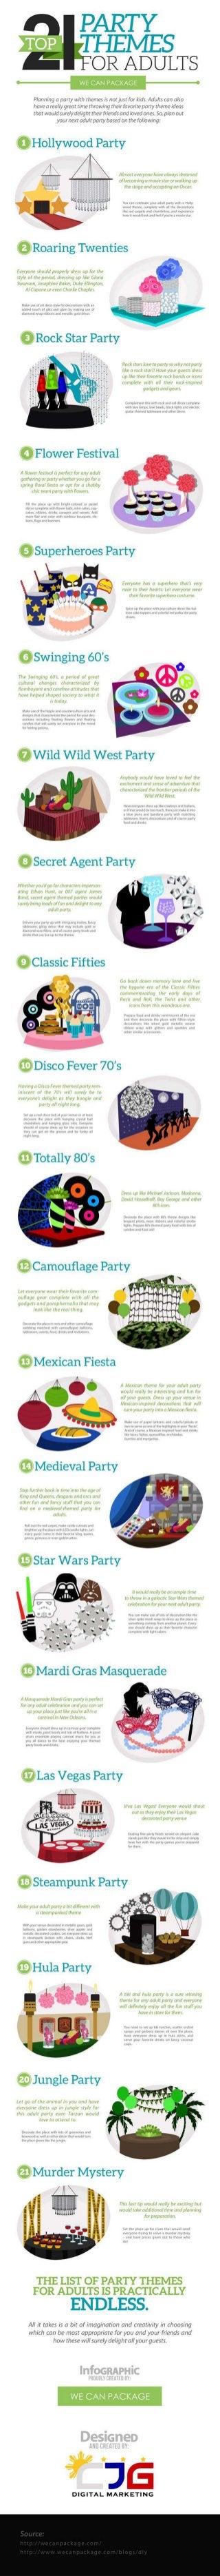 Top 21 party themes for adults (infographic)